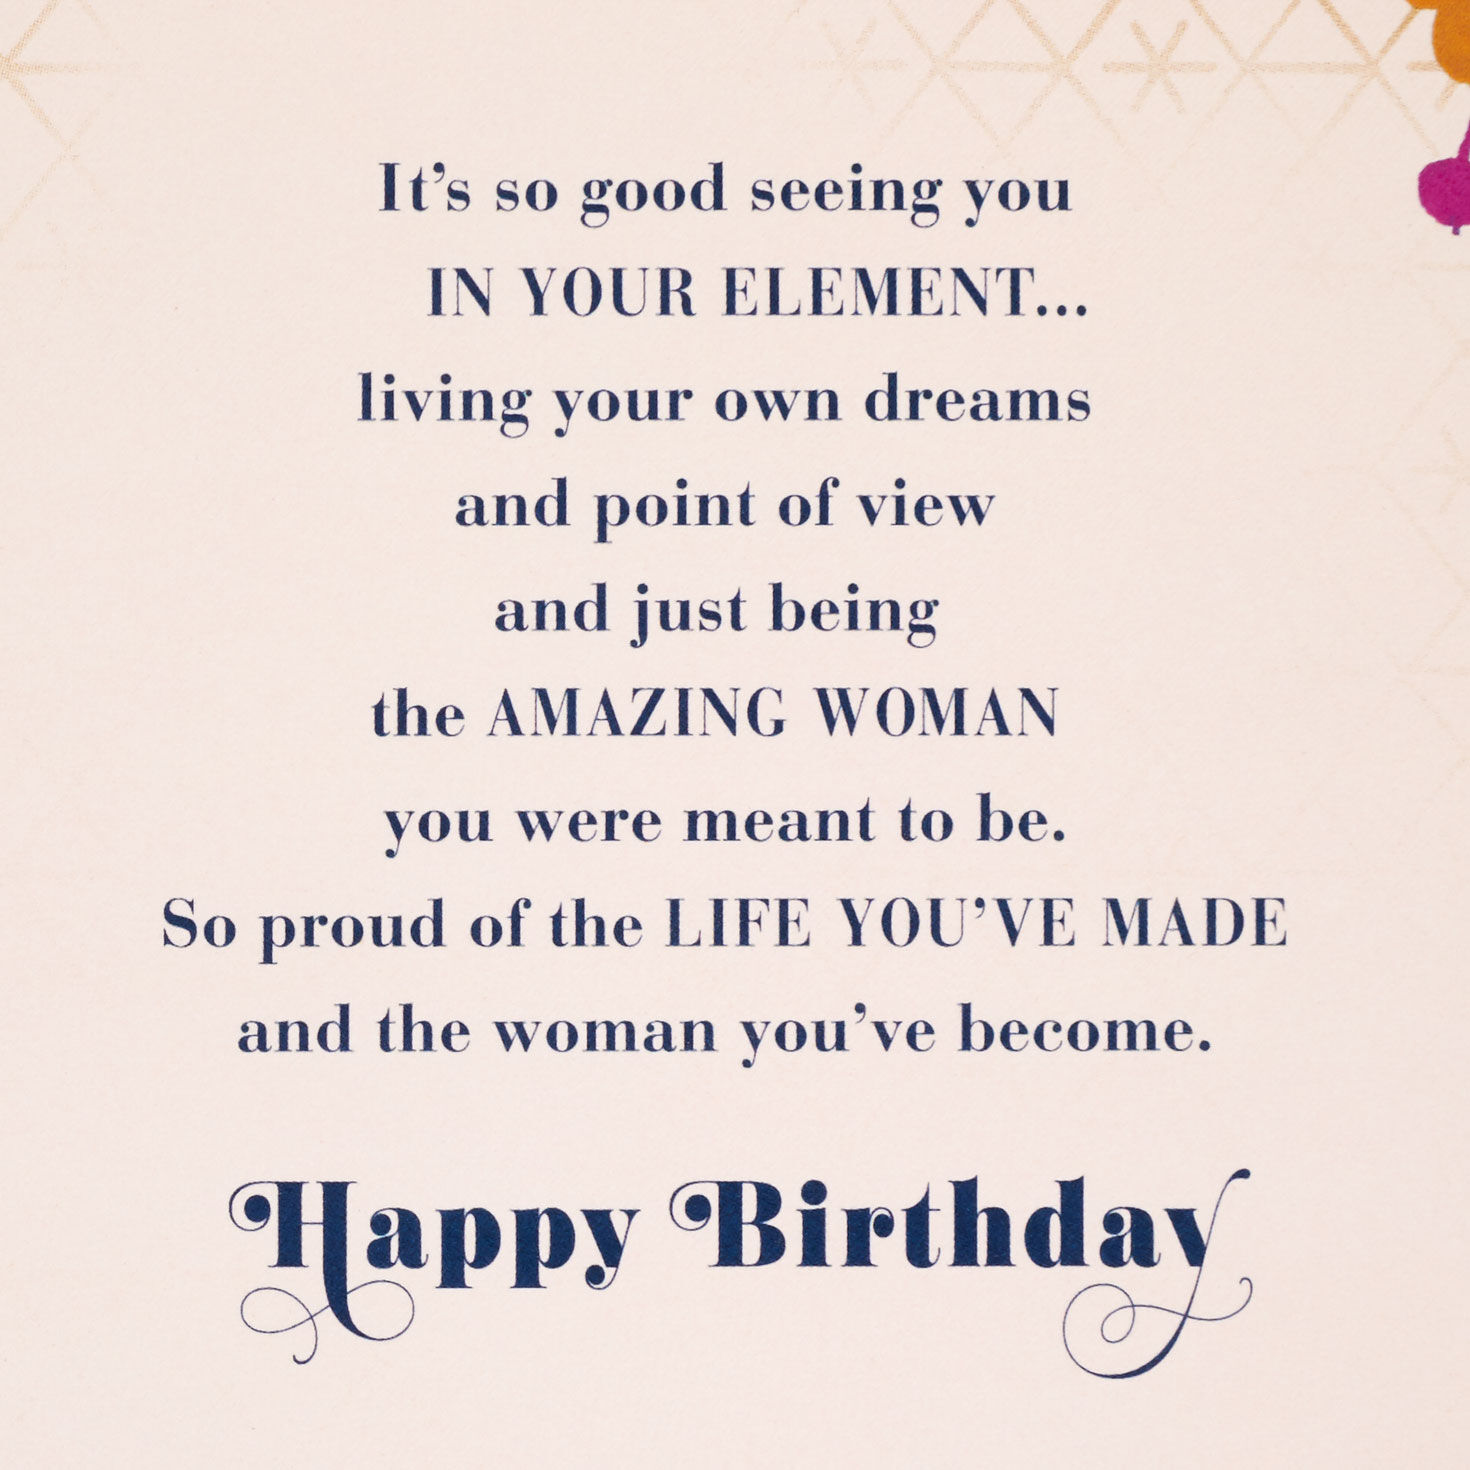 Proud of the Woman You've Become Birthday Card for Daughter for only USD 6.99 | Hallmark